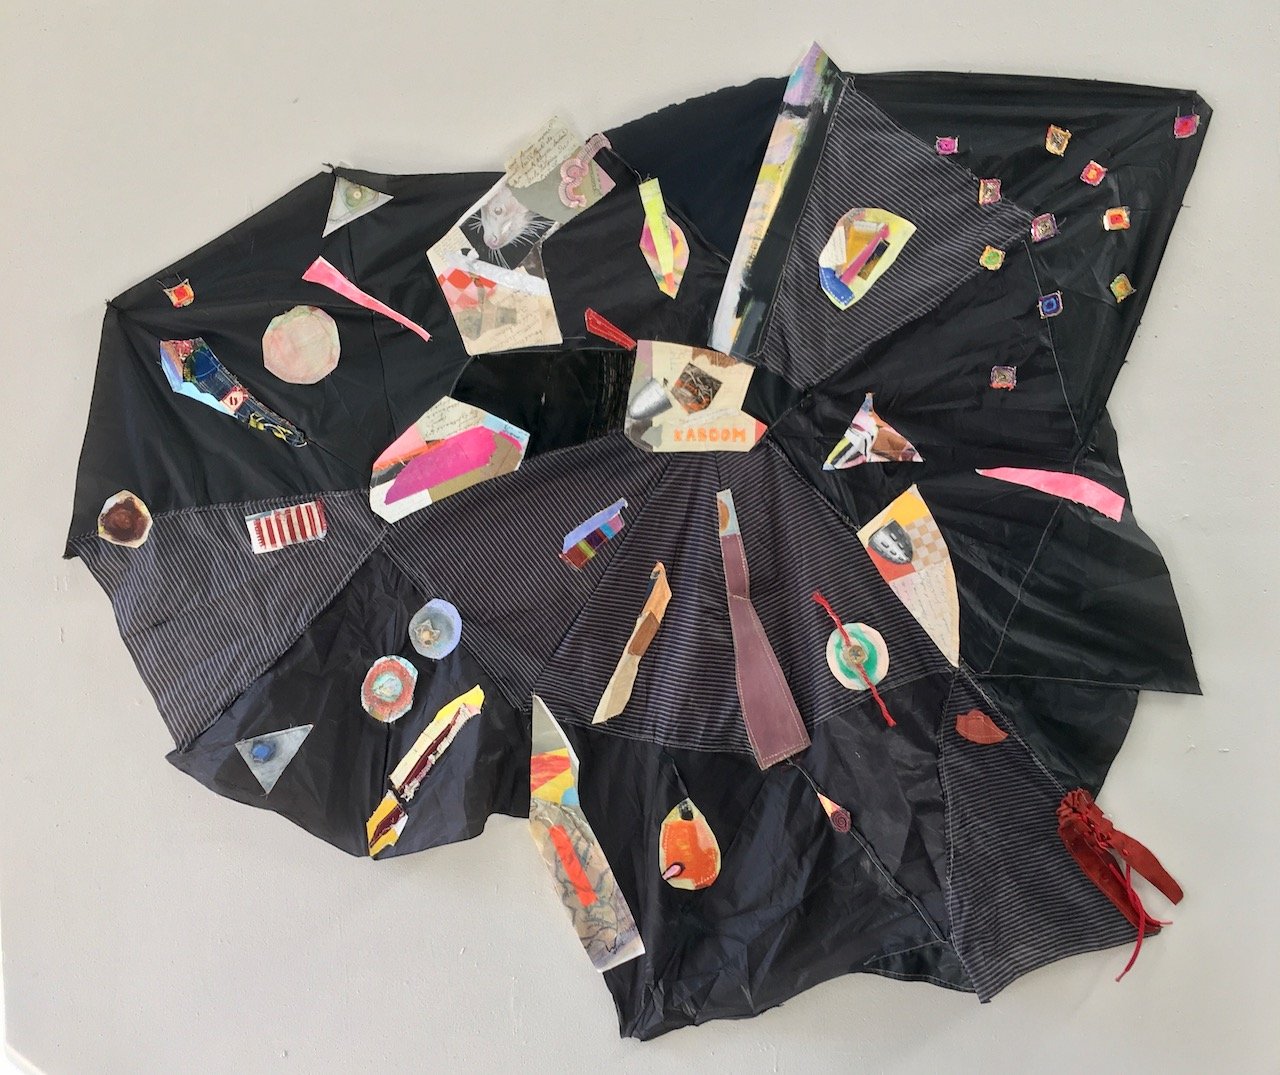 Kaboom (don't be afraid, baby); textiles, paper collage, sewing on umbrella fabric; ca 58" x 63" x 2"; 2022